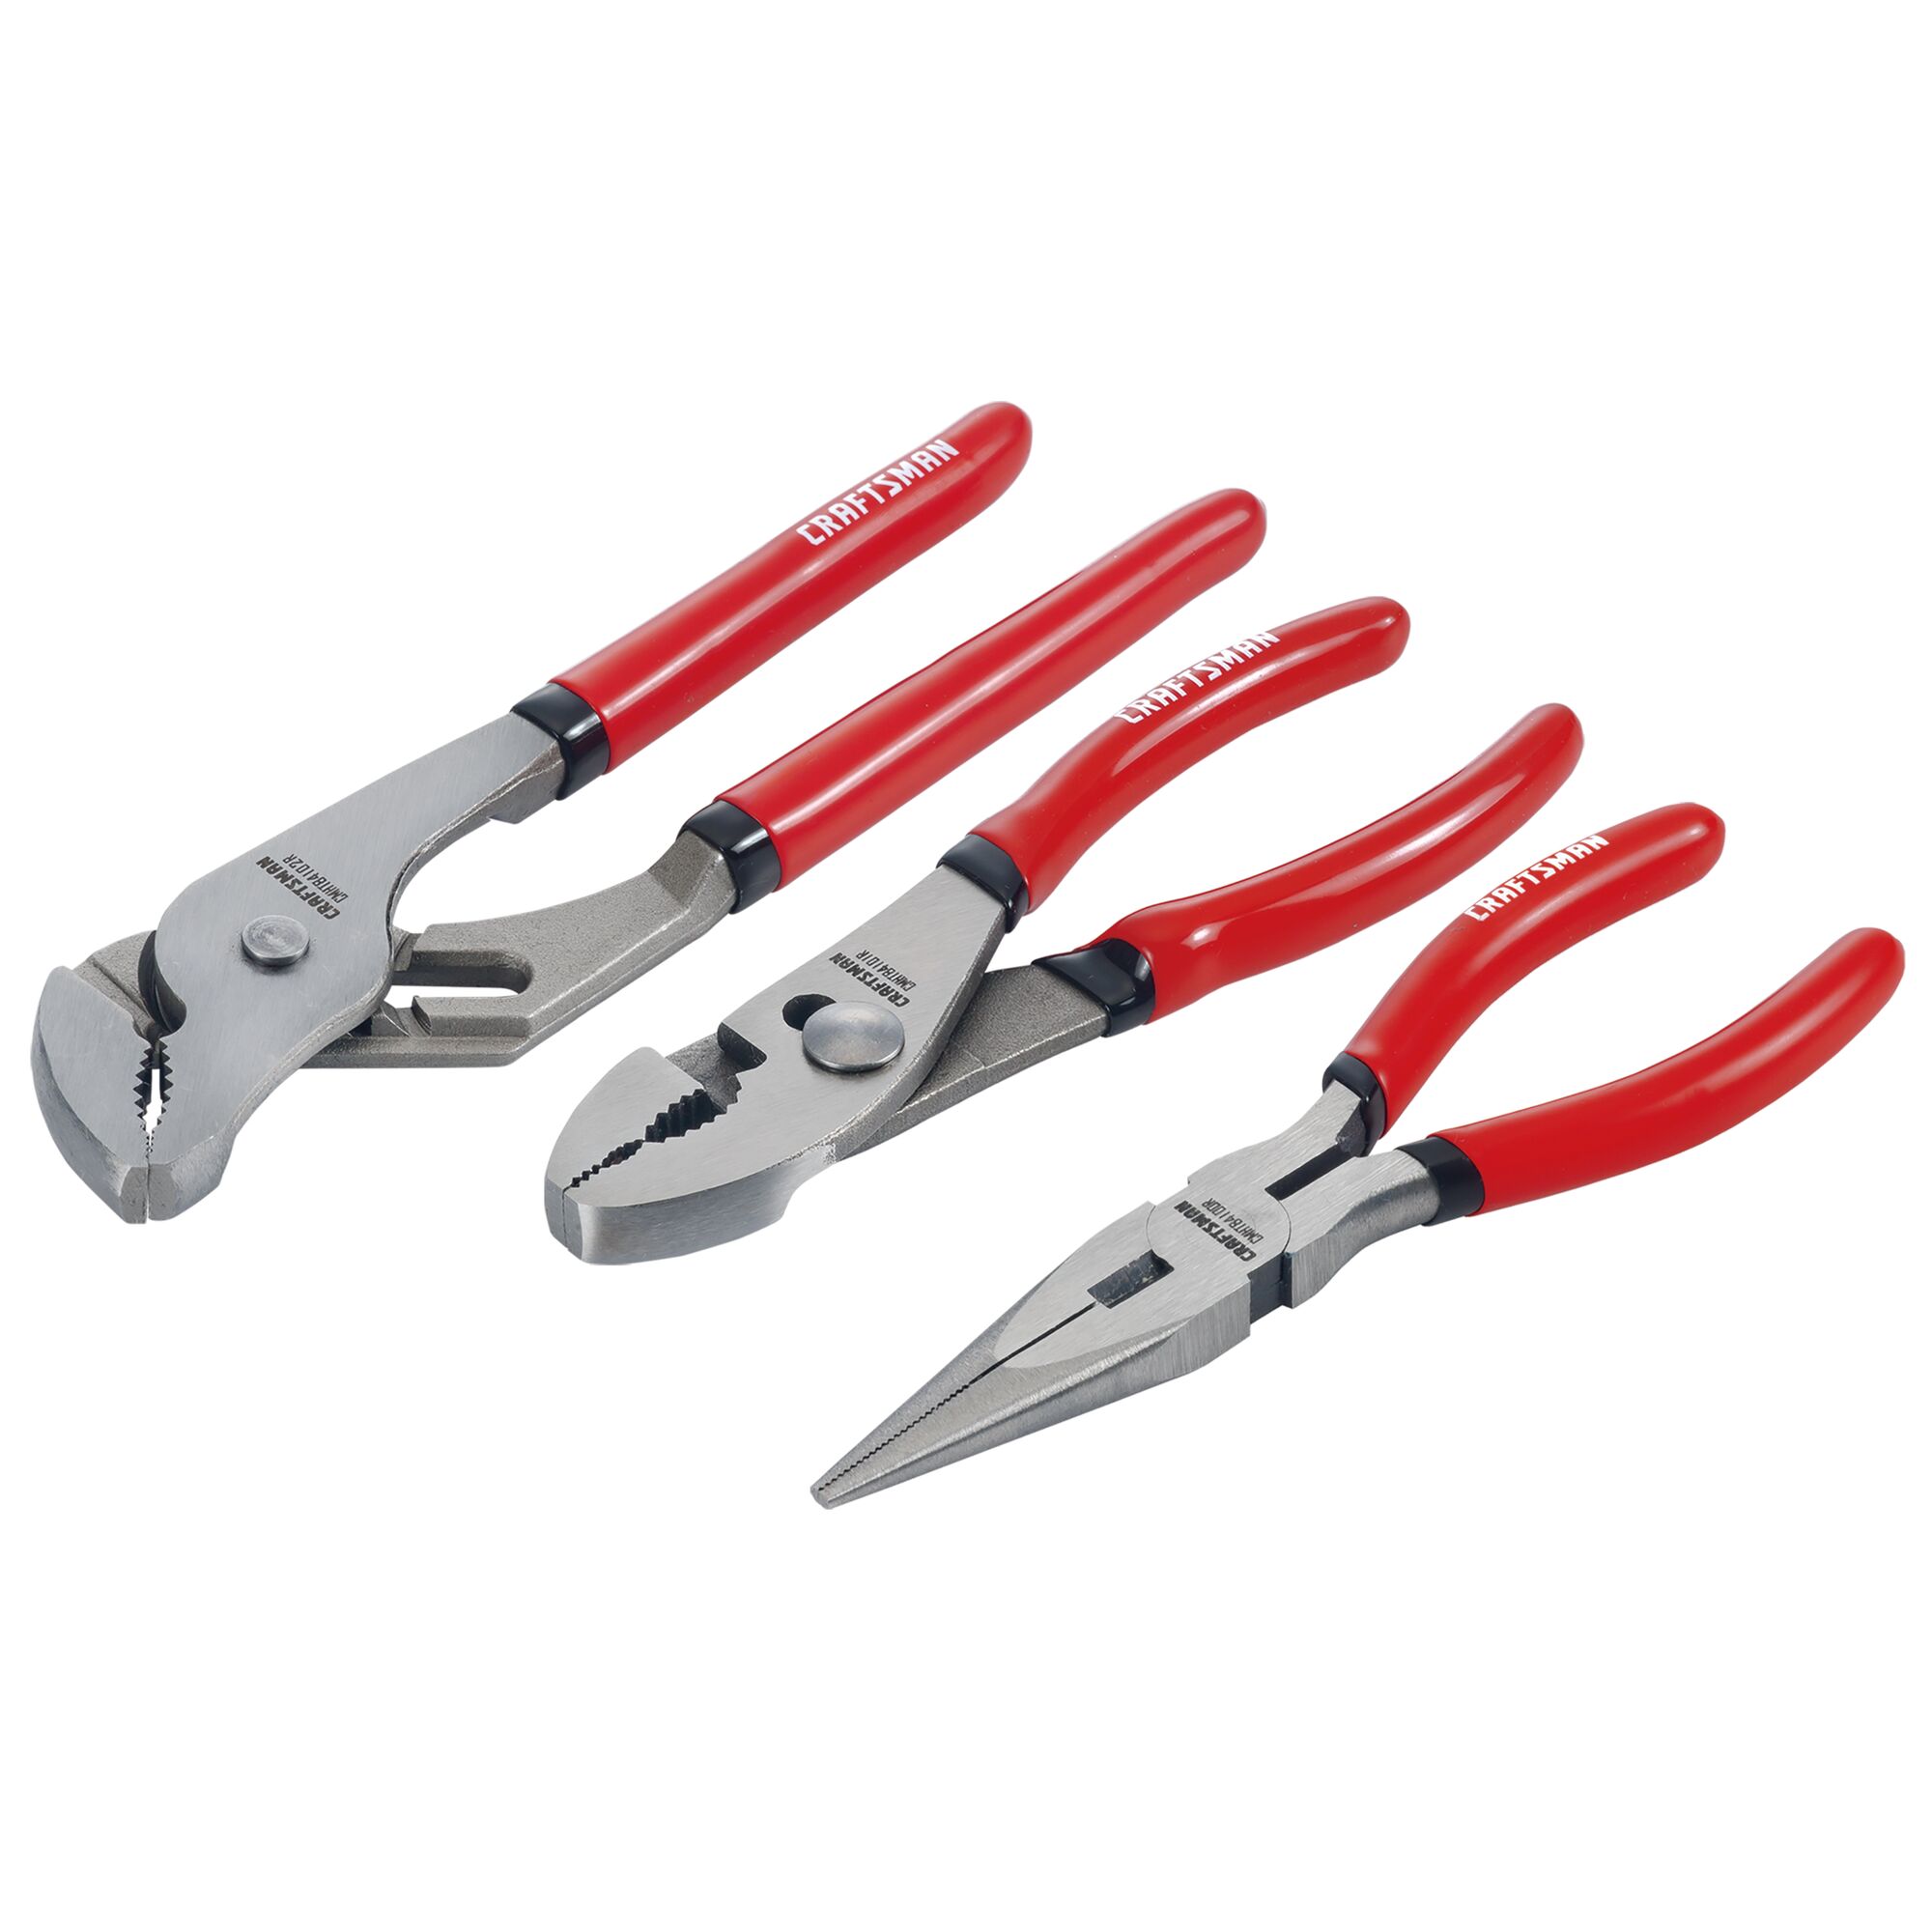 View of CRAFTSMAN Pliers on white background